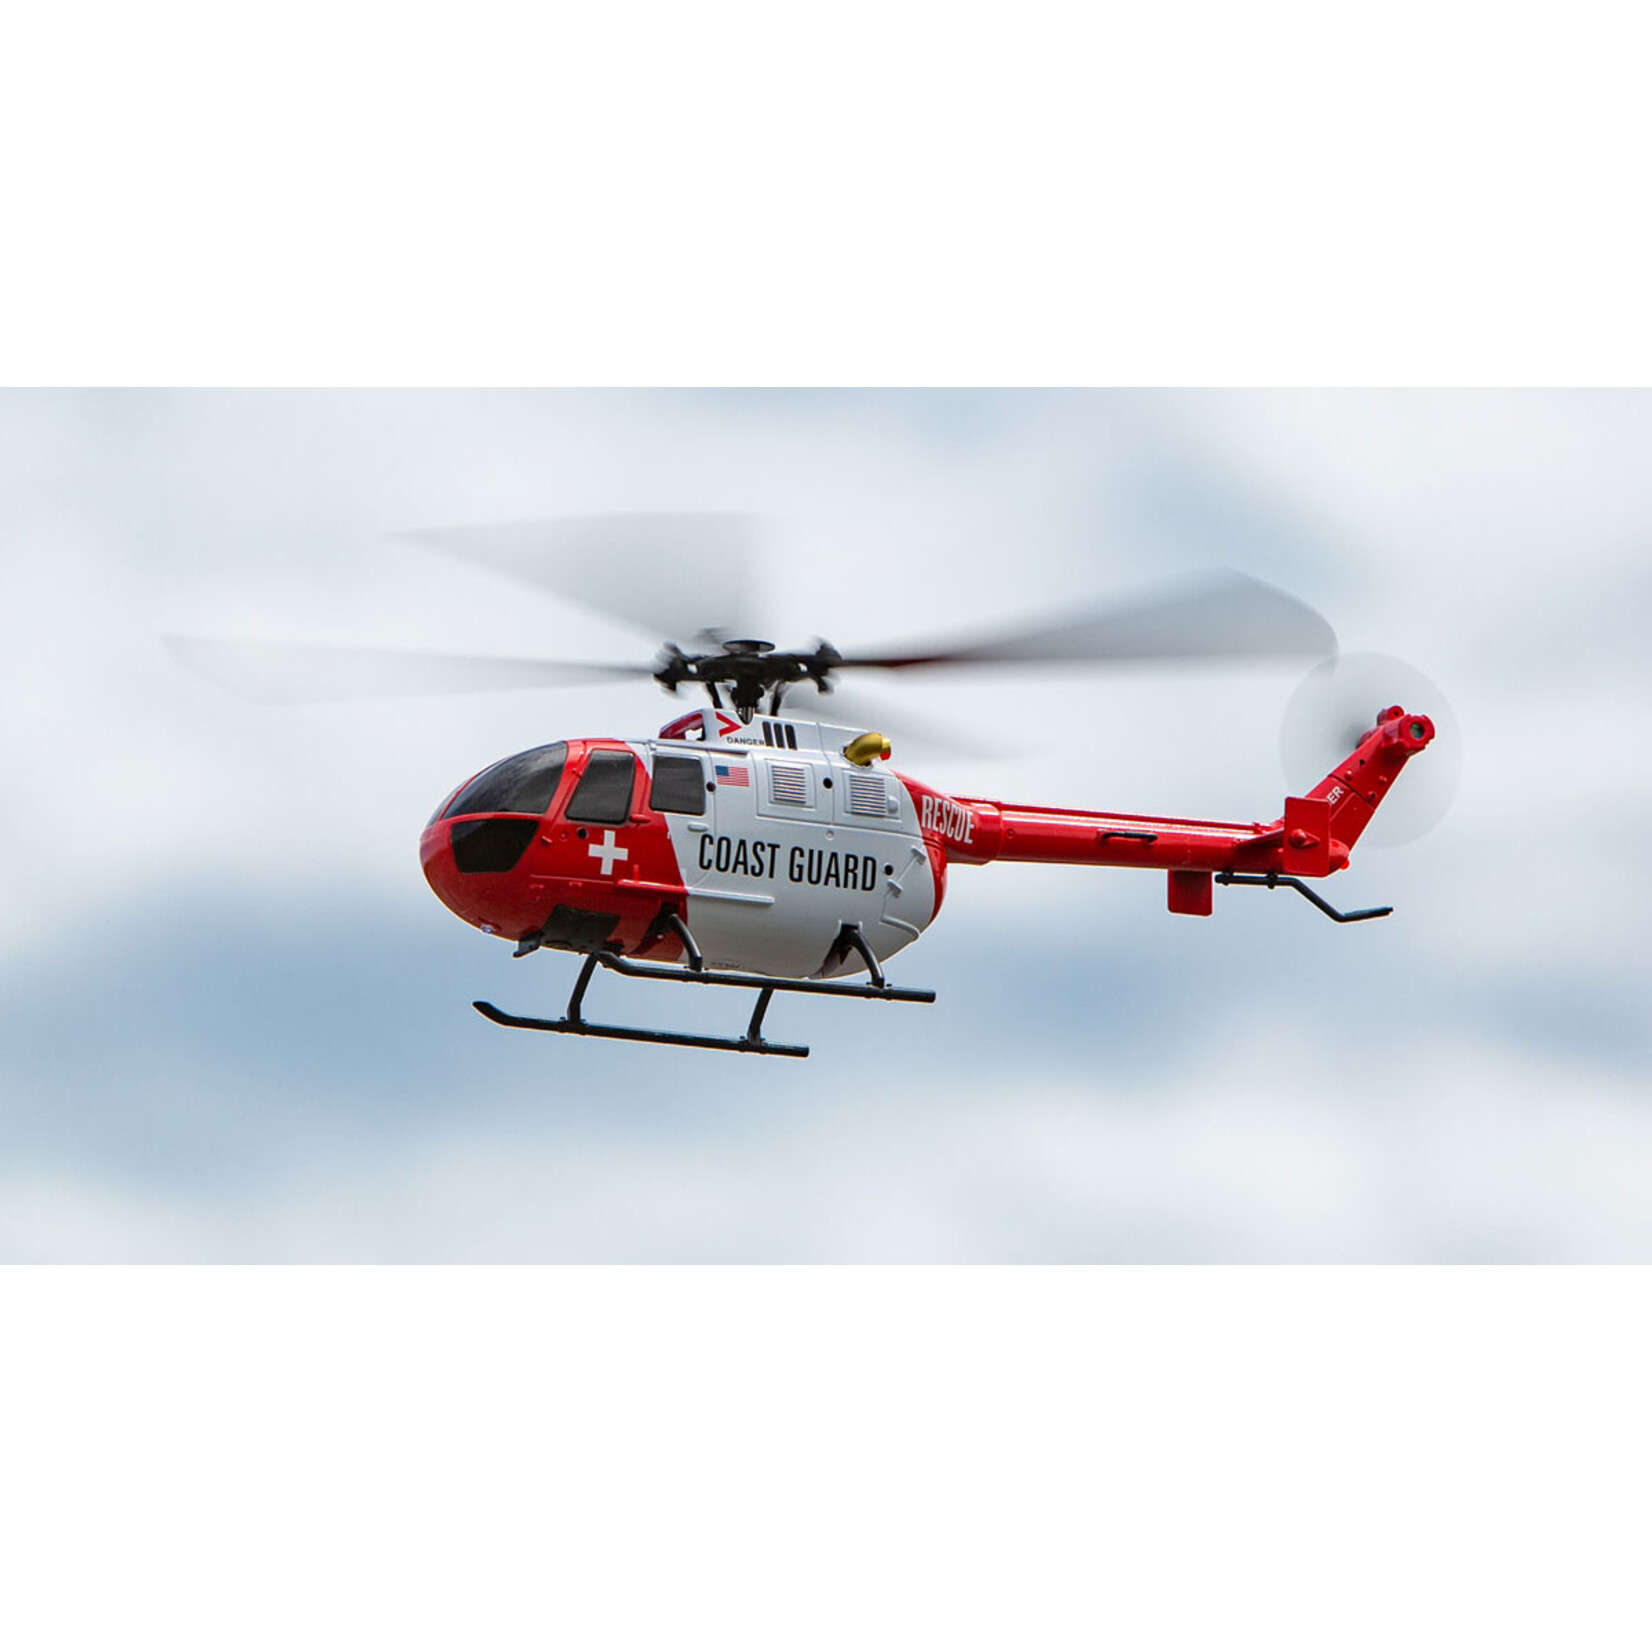 Rage RC Rage RC Hero-Copter 4-Blade RTF Helicopter (Coast Guard) #RGR6050